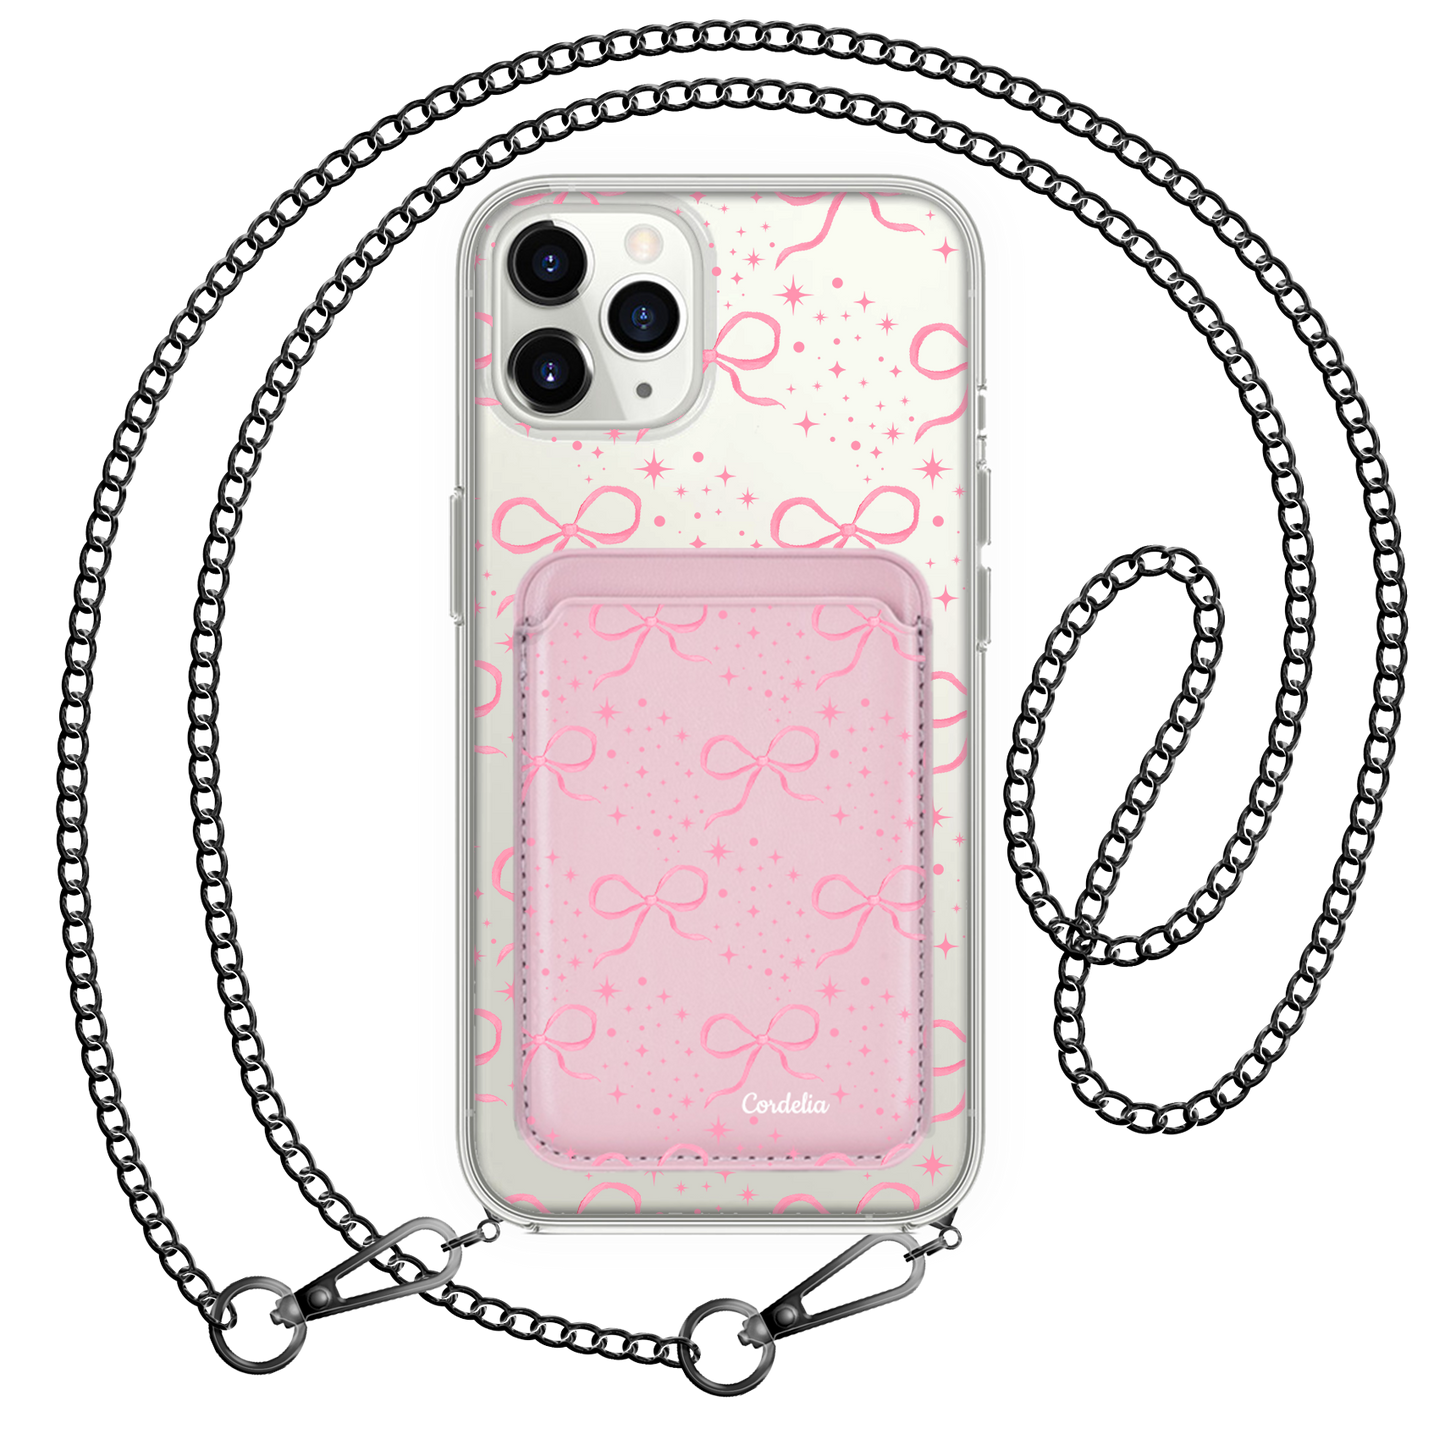 iPhone Magnetic Wallet Case - Coquette Glittery Bow